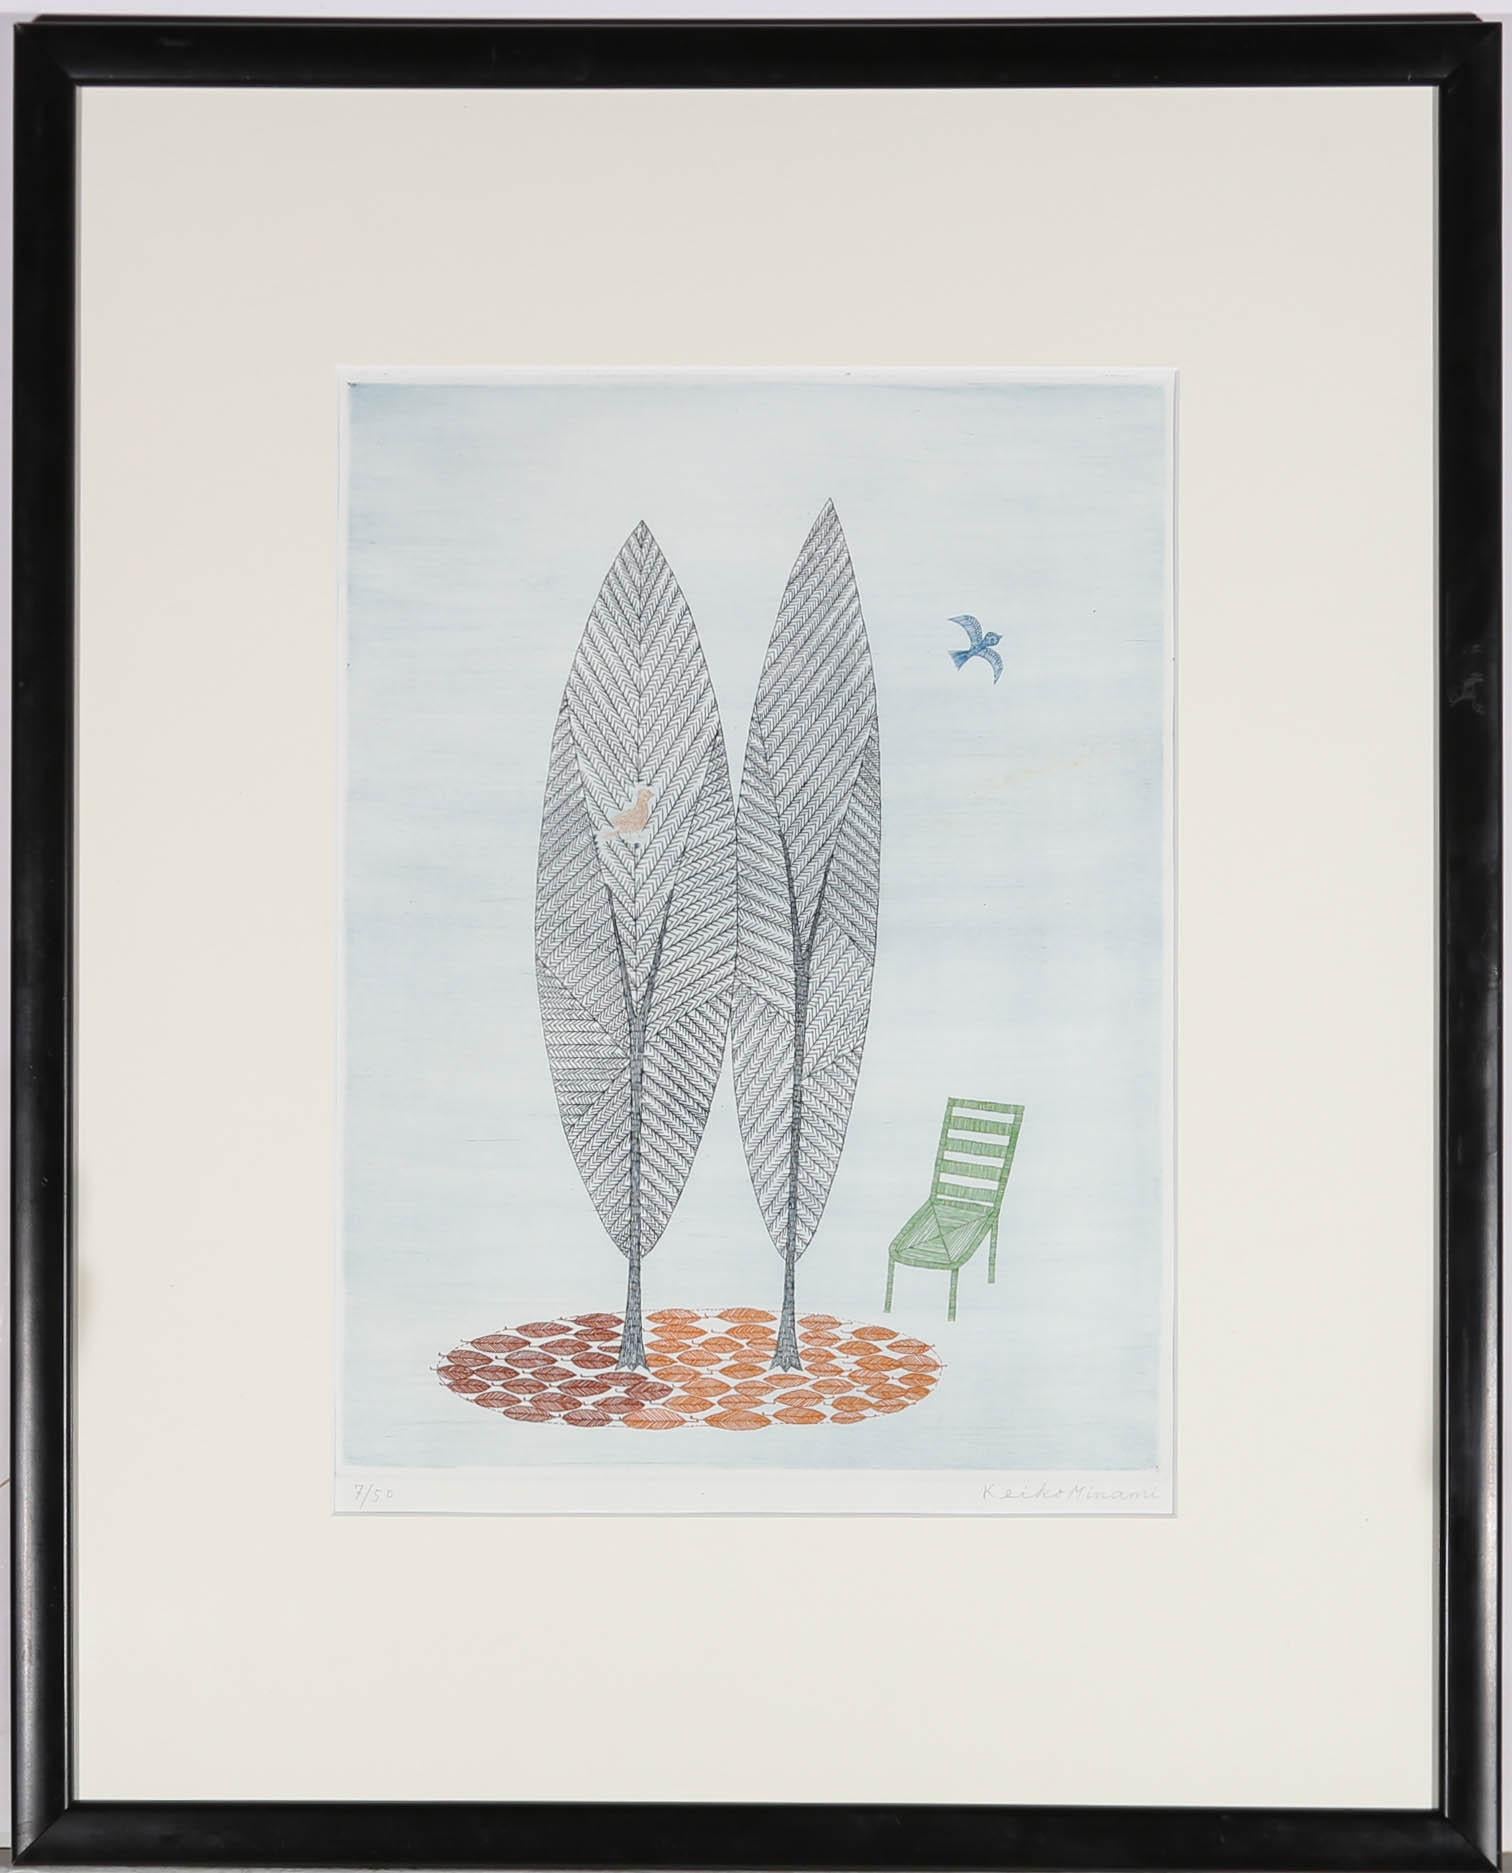 An utterly charming etching from the prolific and successful print maker, Keiko Minami. The etching has in plate colouring, showing two tall trees, their orange leaves fallen to the ground around the trunks and a green chair to the right. An orange